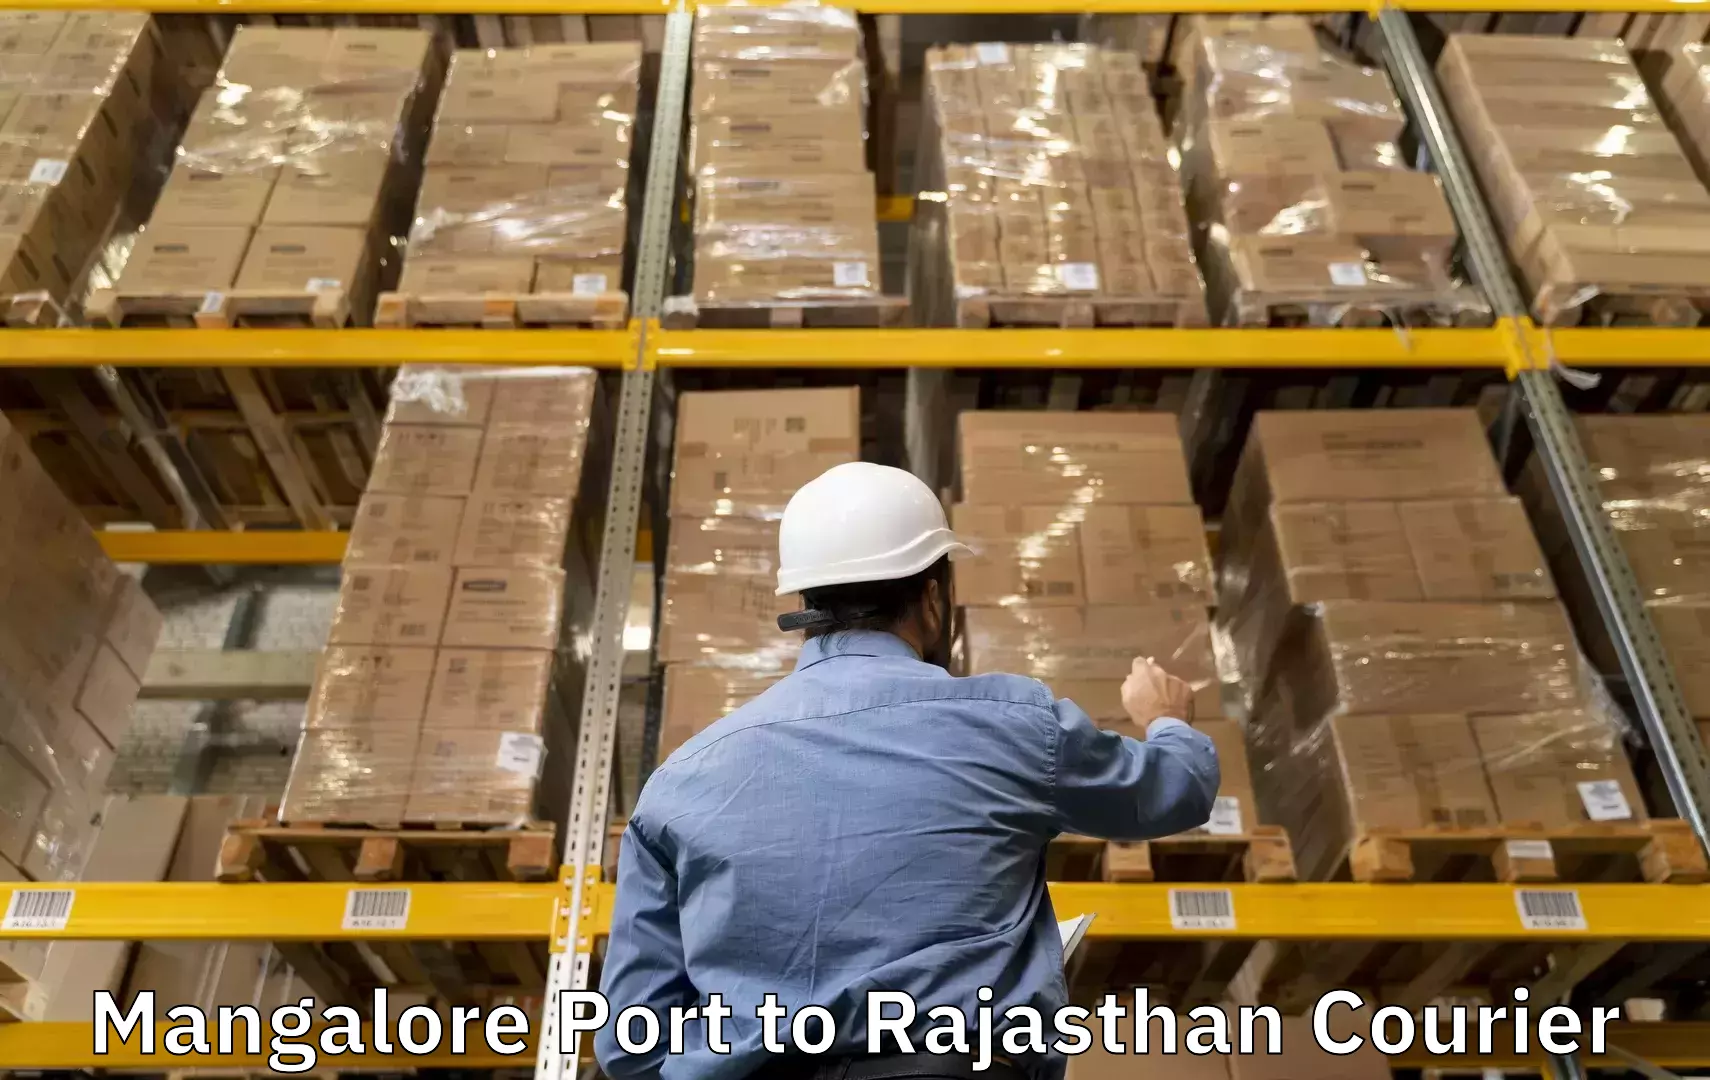 Baggage relocation service Mangalore Port to Reodar